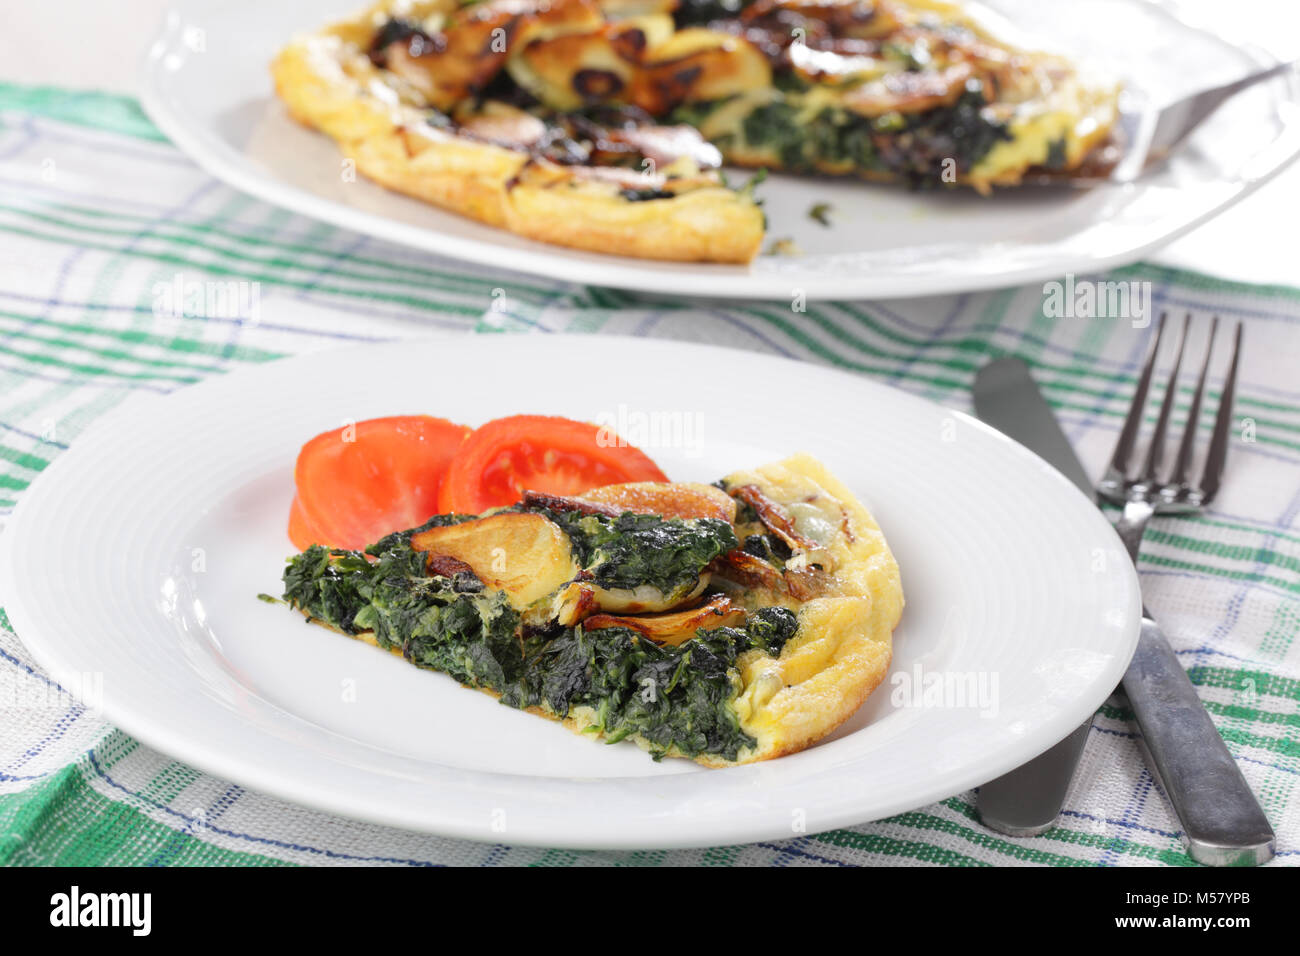 Frittata with spinach, potato, and tomato on white plate Stock Photo